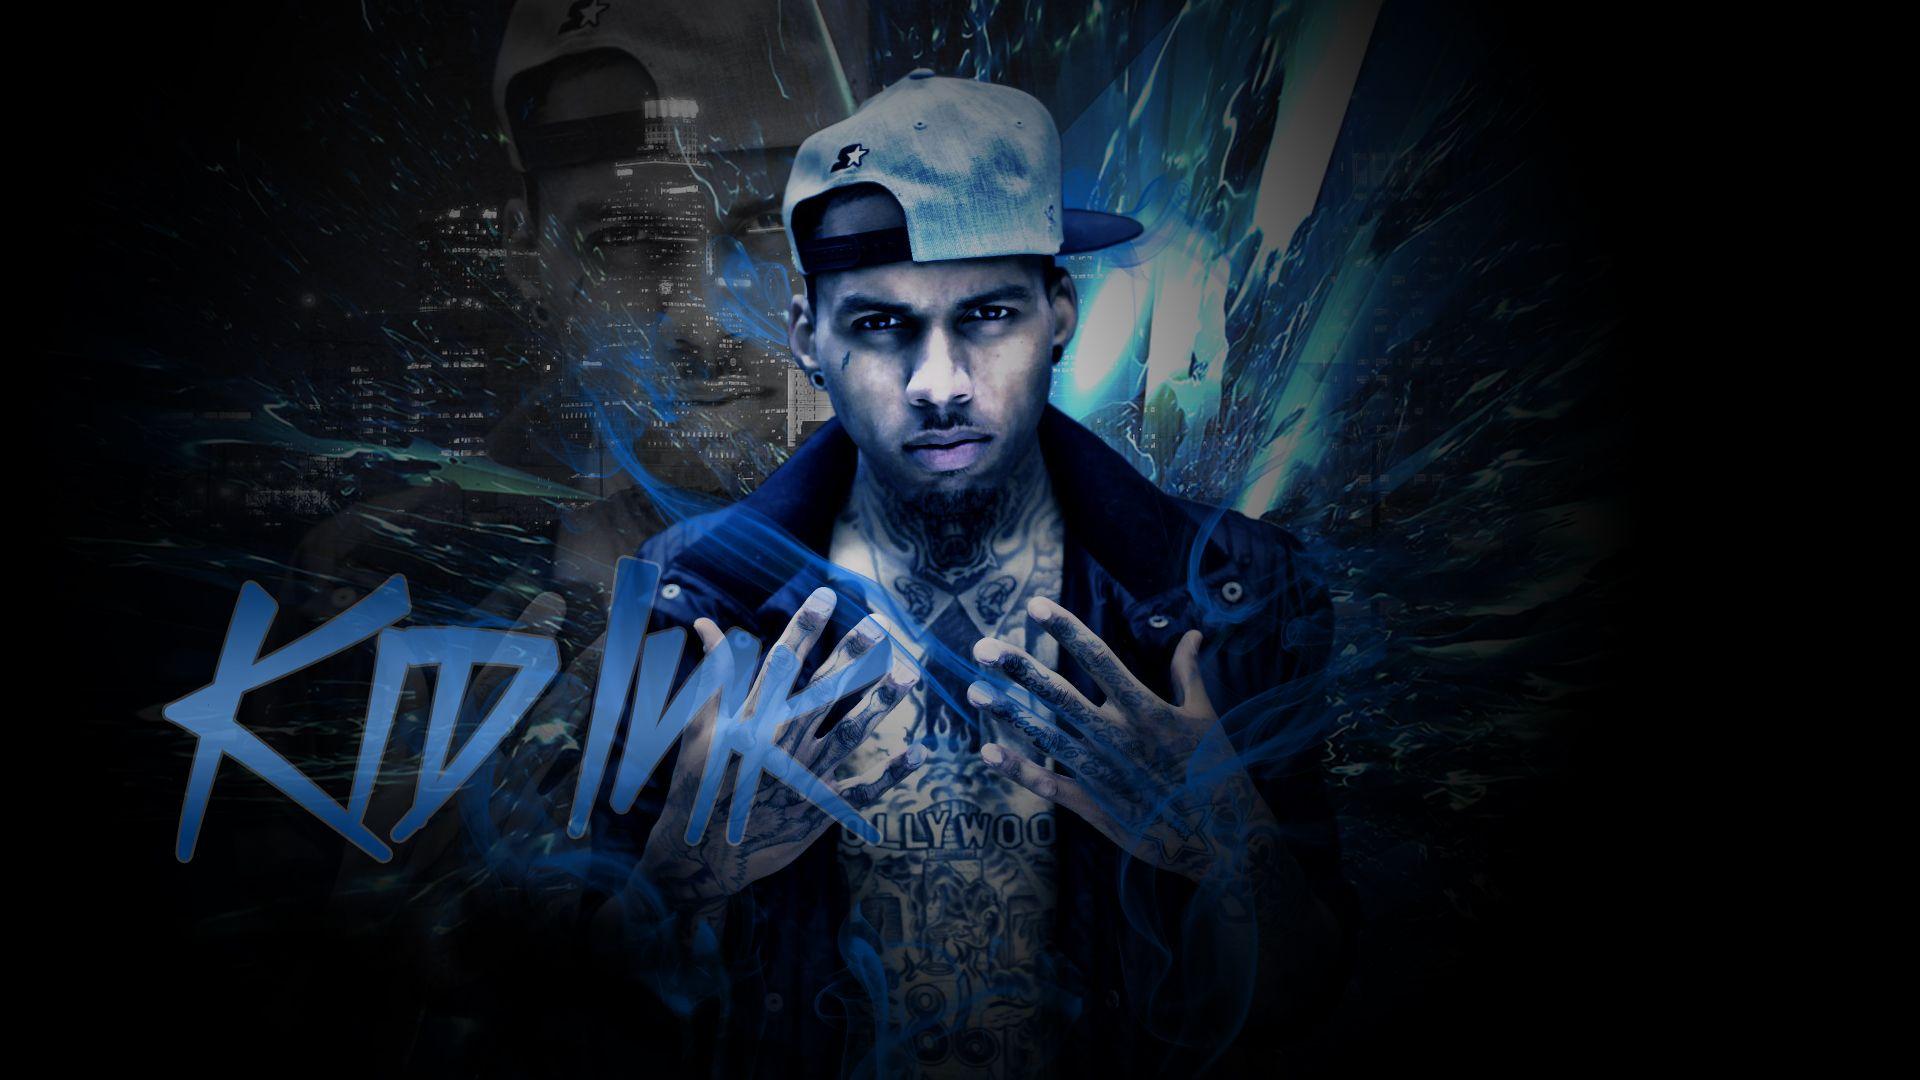 Kid Ink Wallpaper, High Definition, High Quality